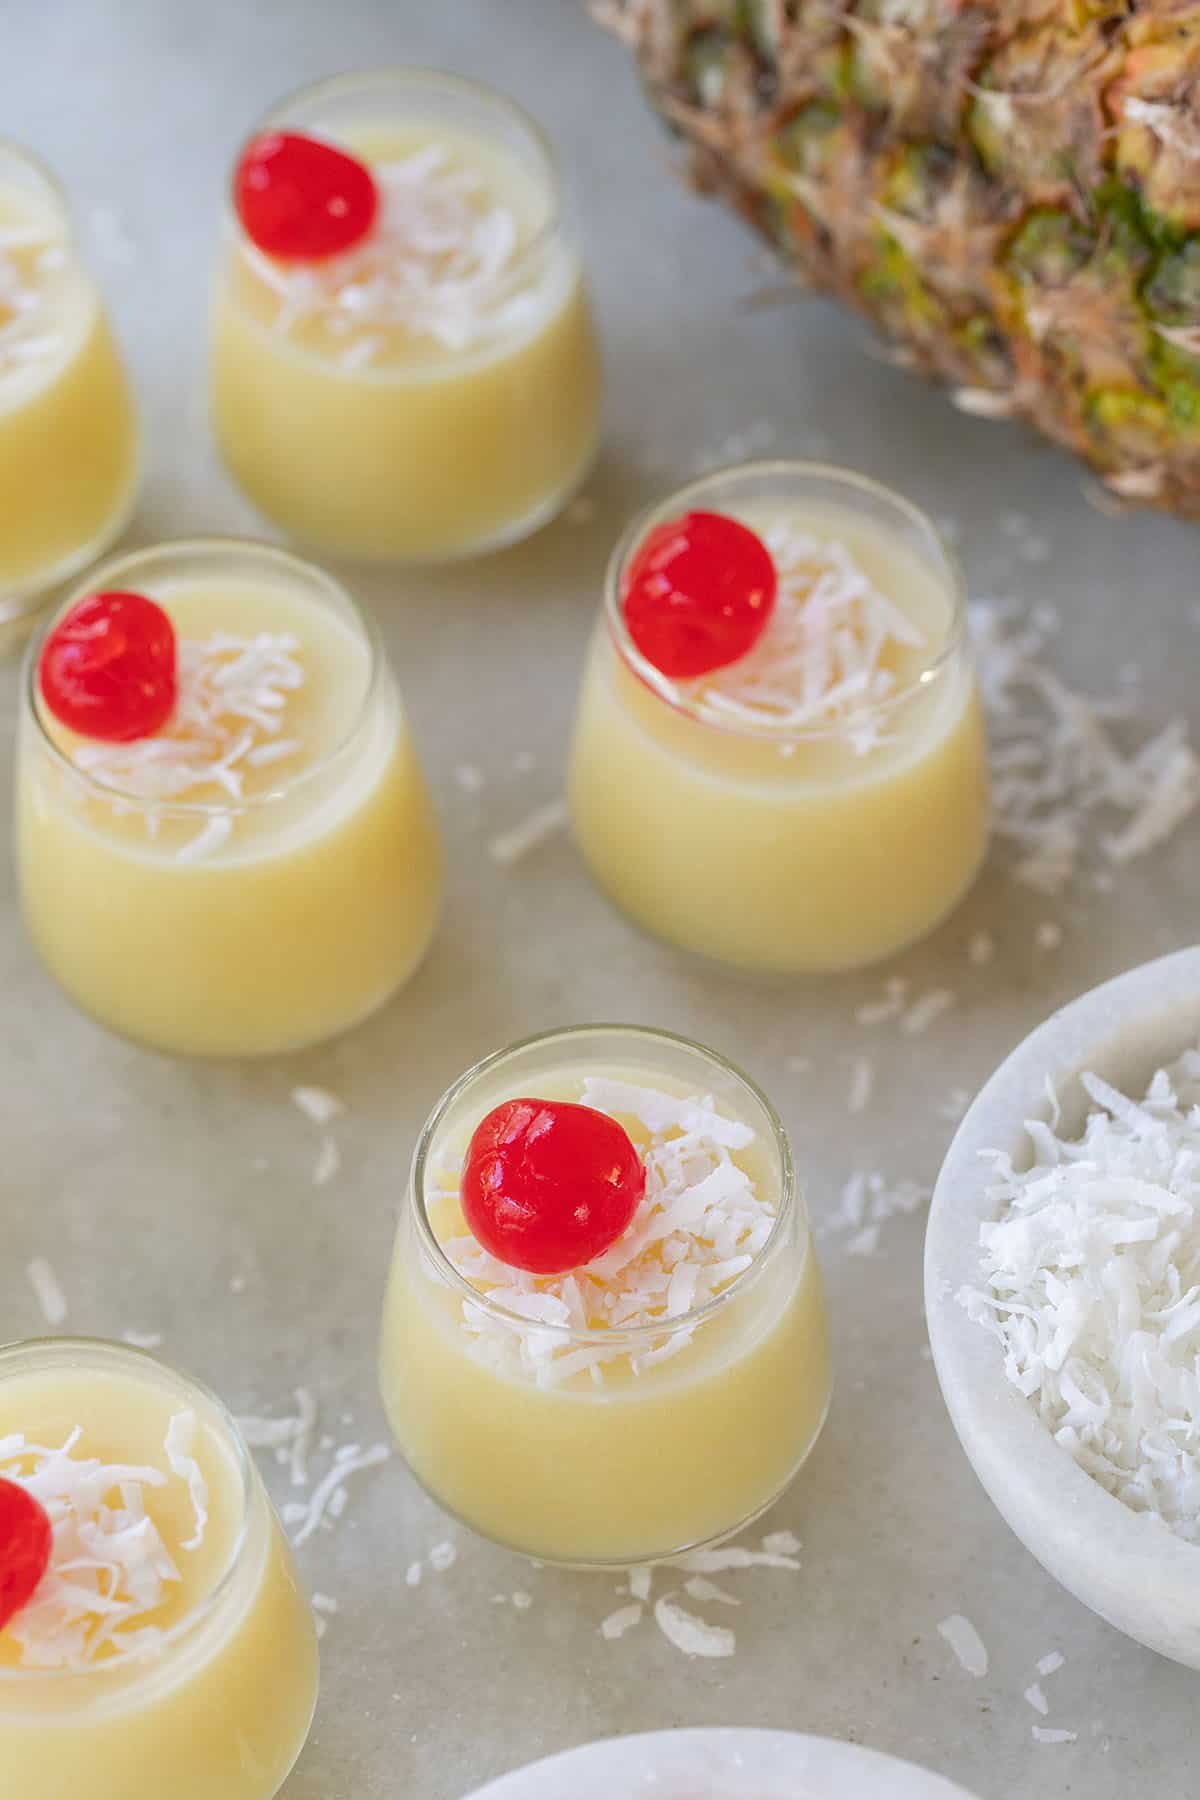 Pina colada jello shots with cherry and coconut over the top.